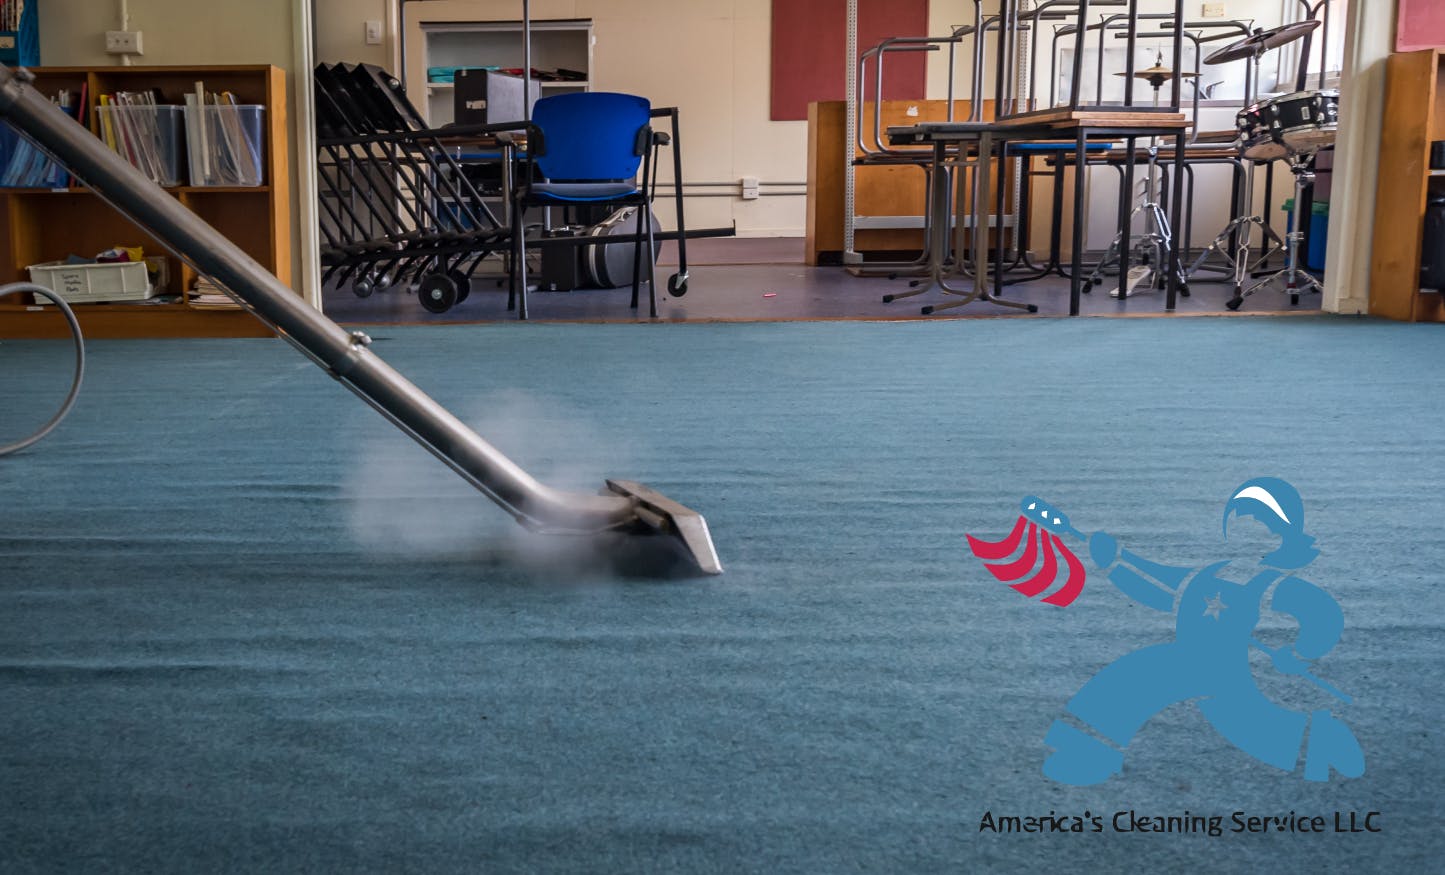 America's Cleaning Service LLC: Cleaning Services Review